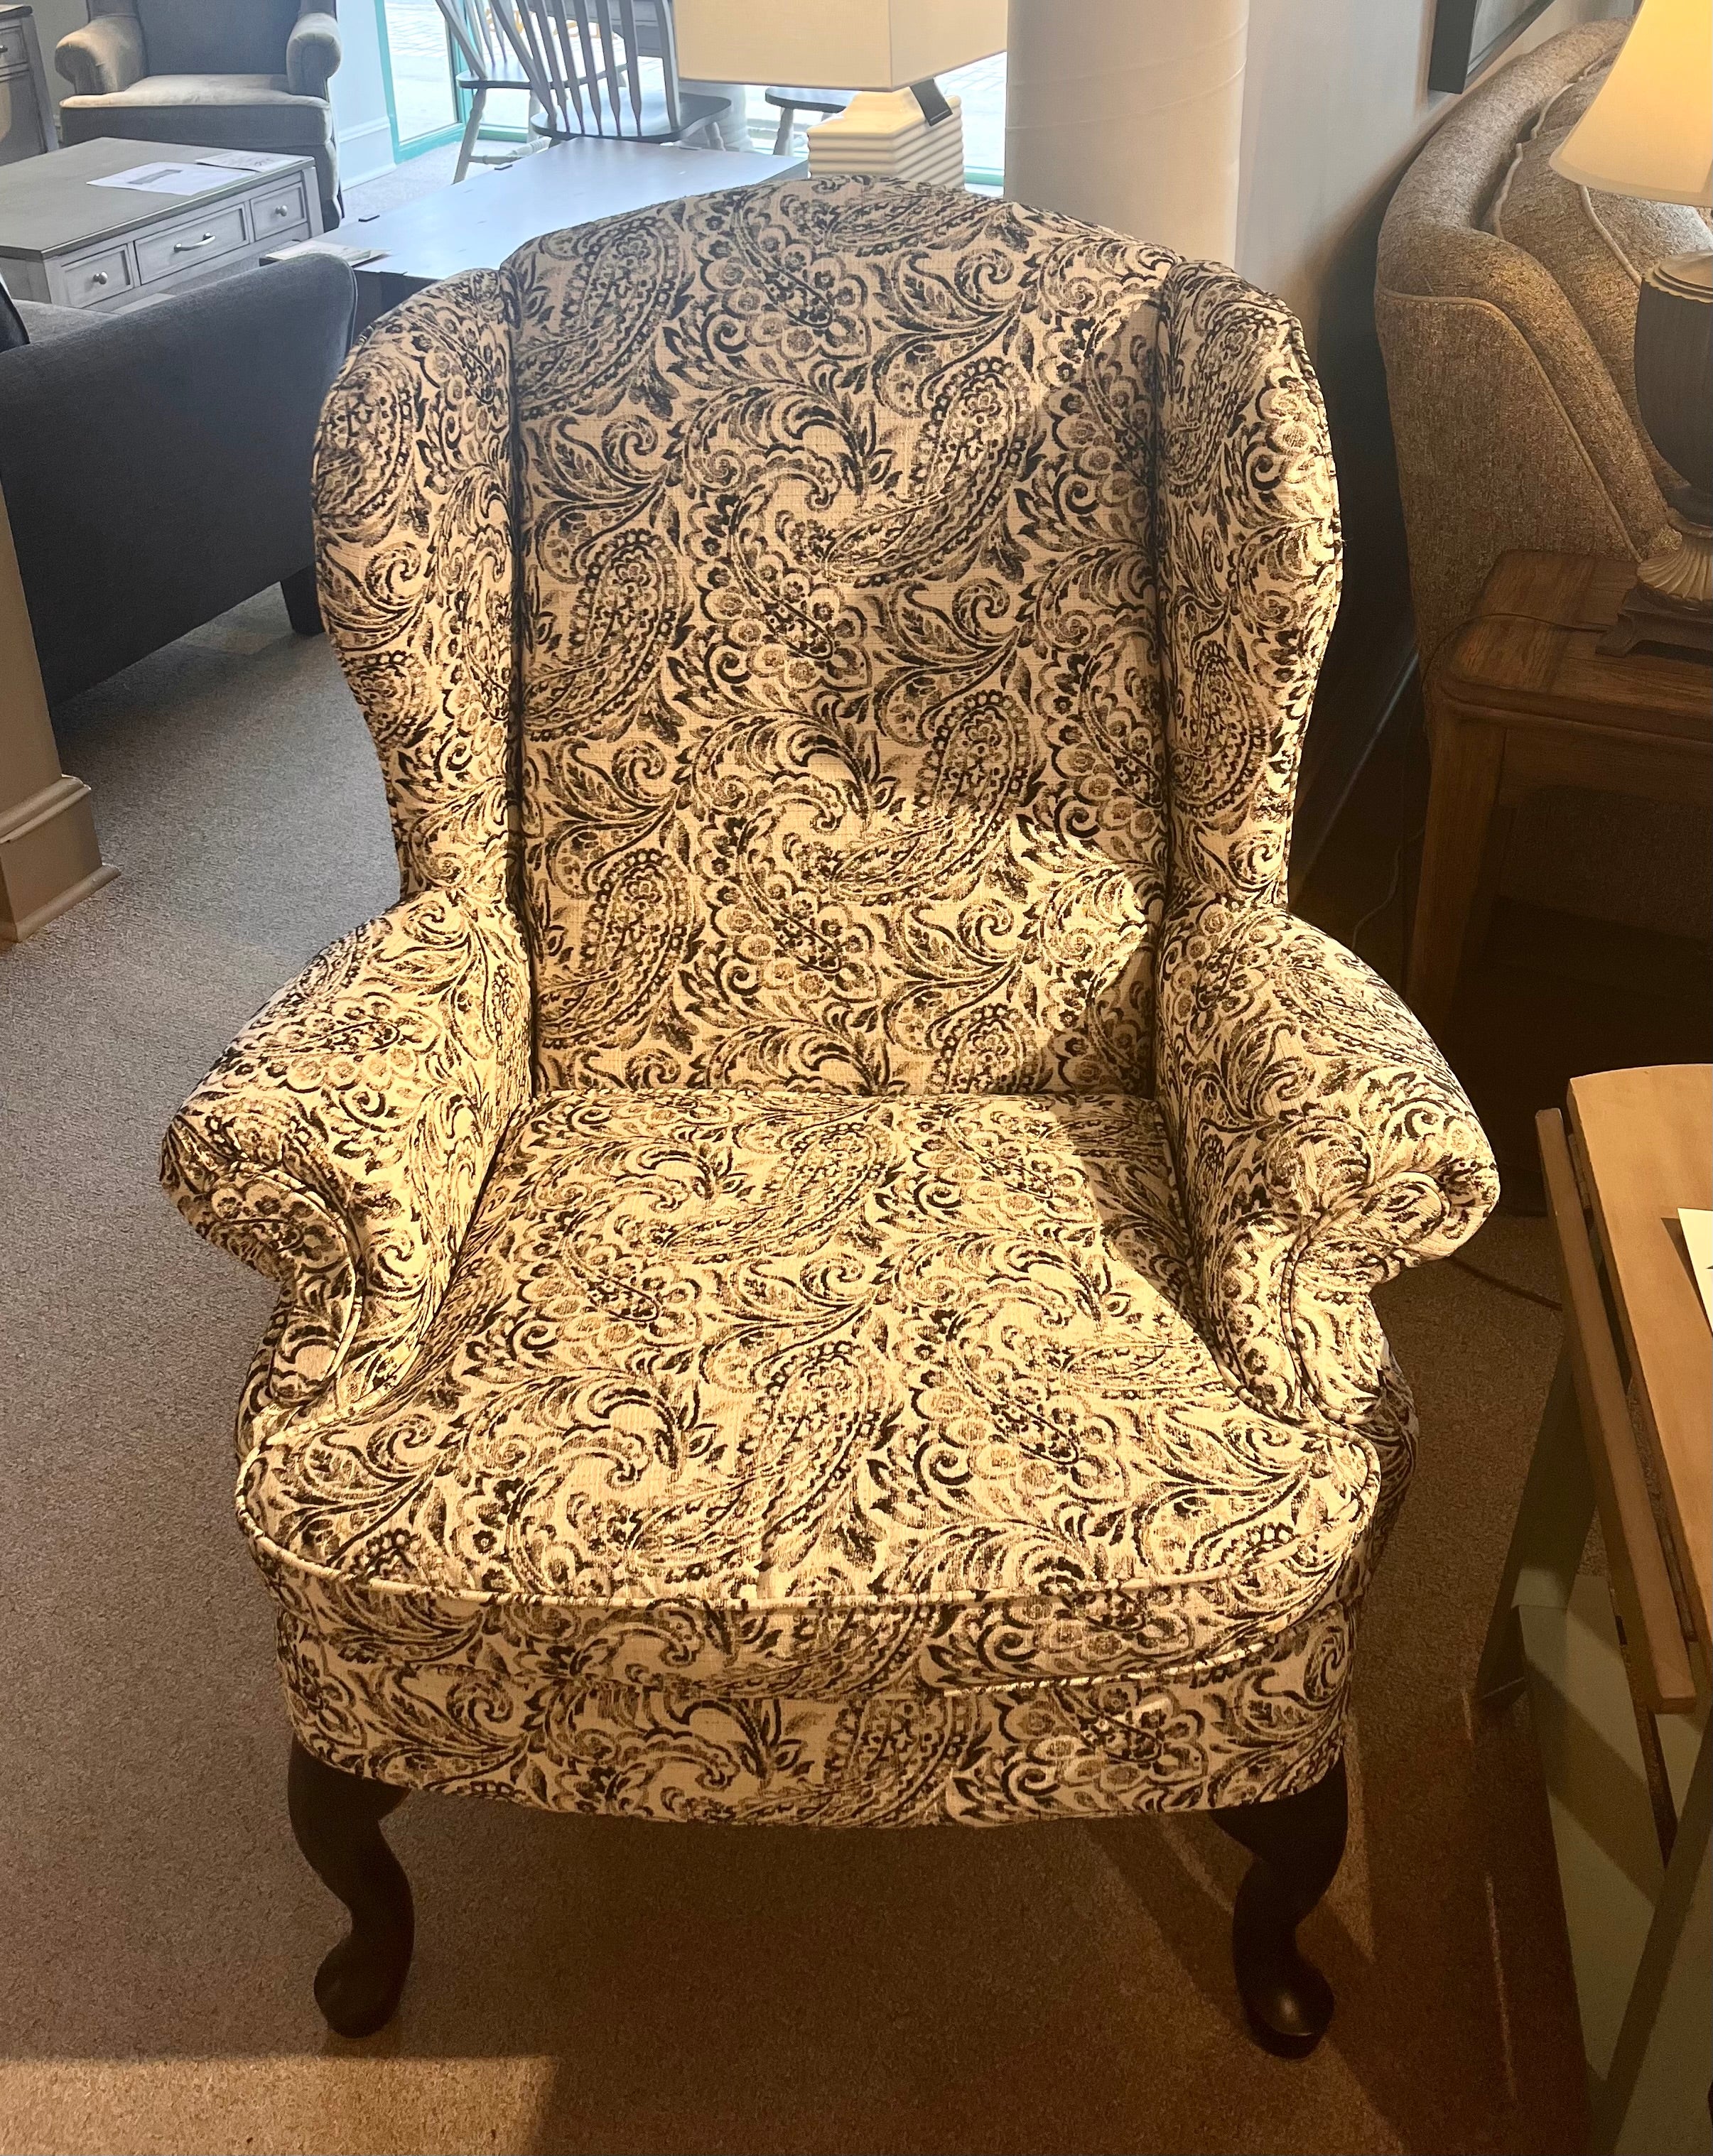 Sylivia Wingback chair